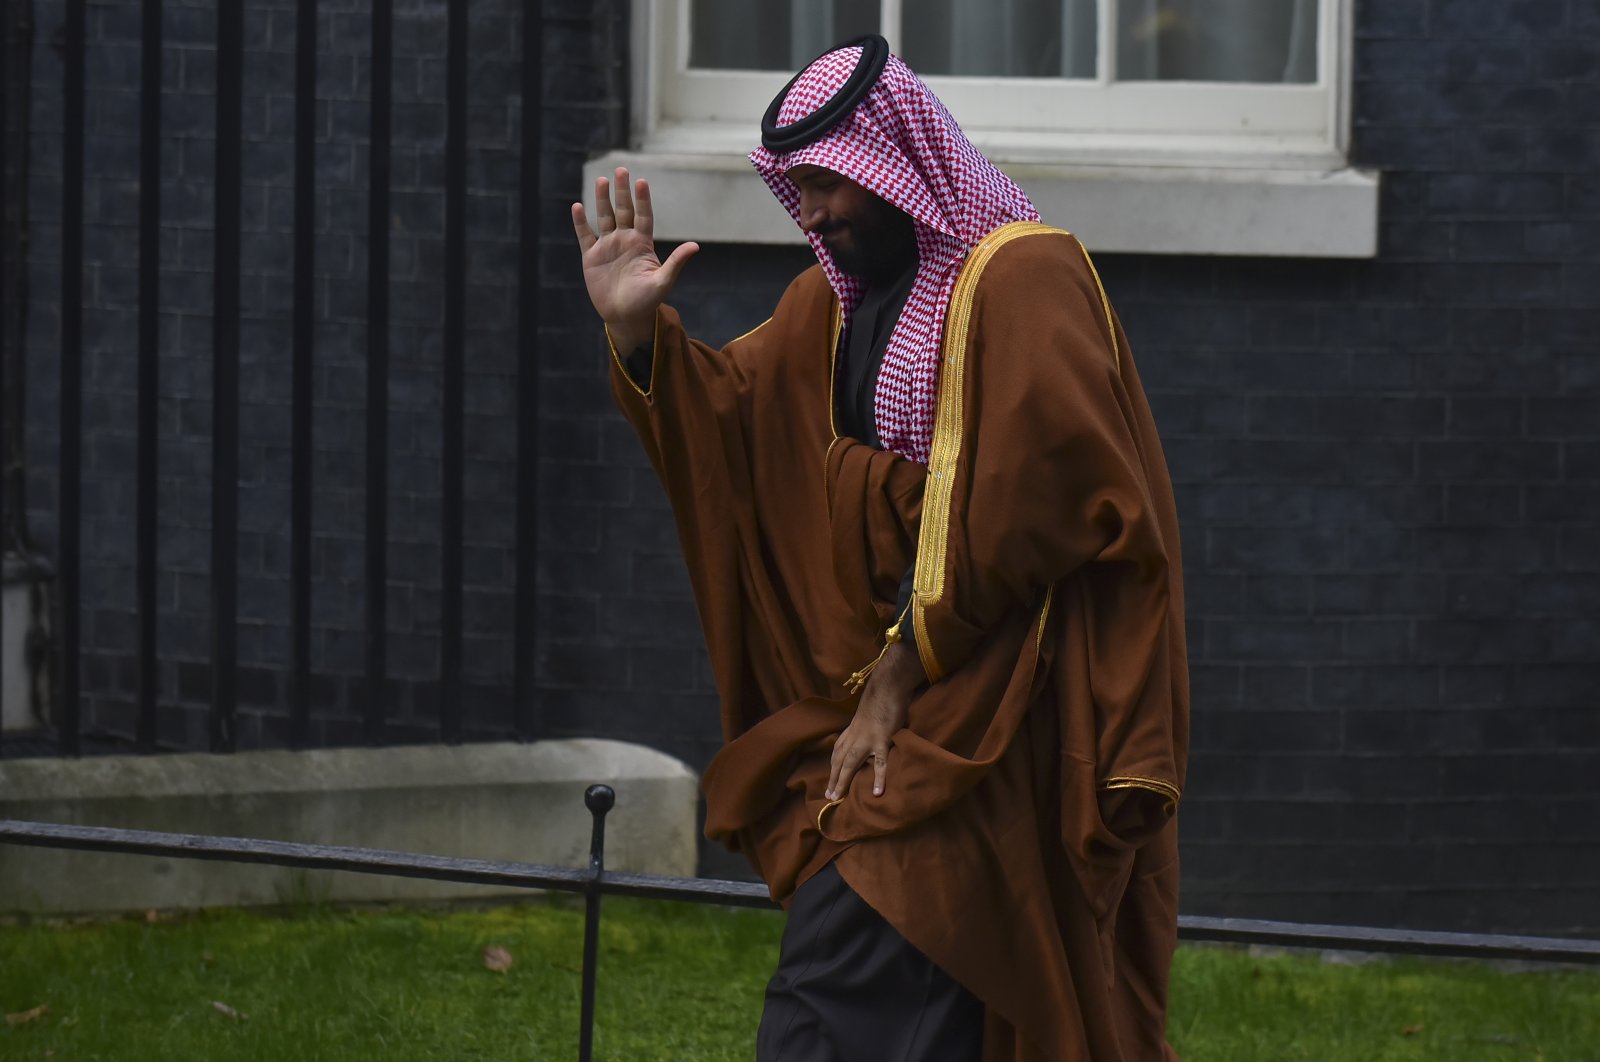 Saudi Crown Prince Mohammed bin Salman (MBS) arrives at Downing Street, London, U.K., March 7, 2018. (Photo by Getty Images)